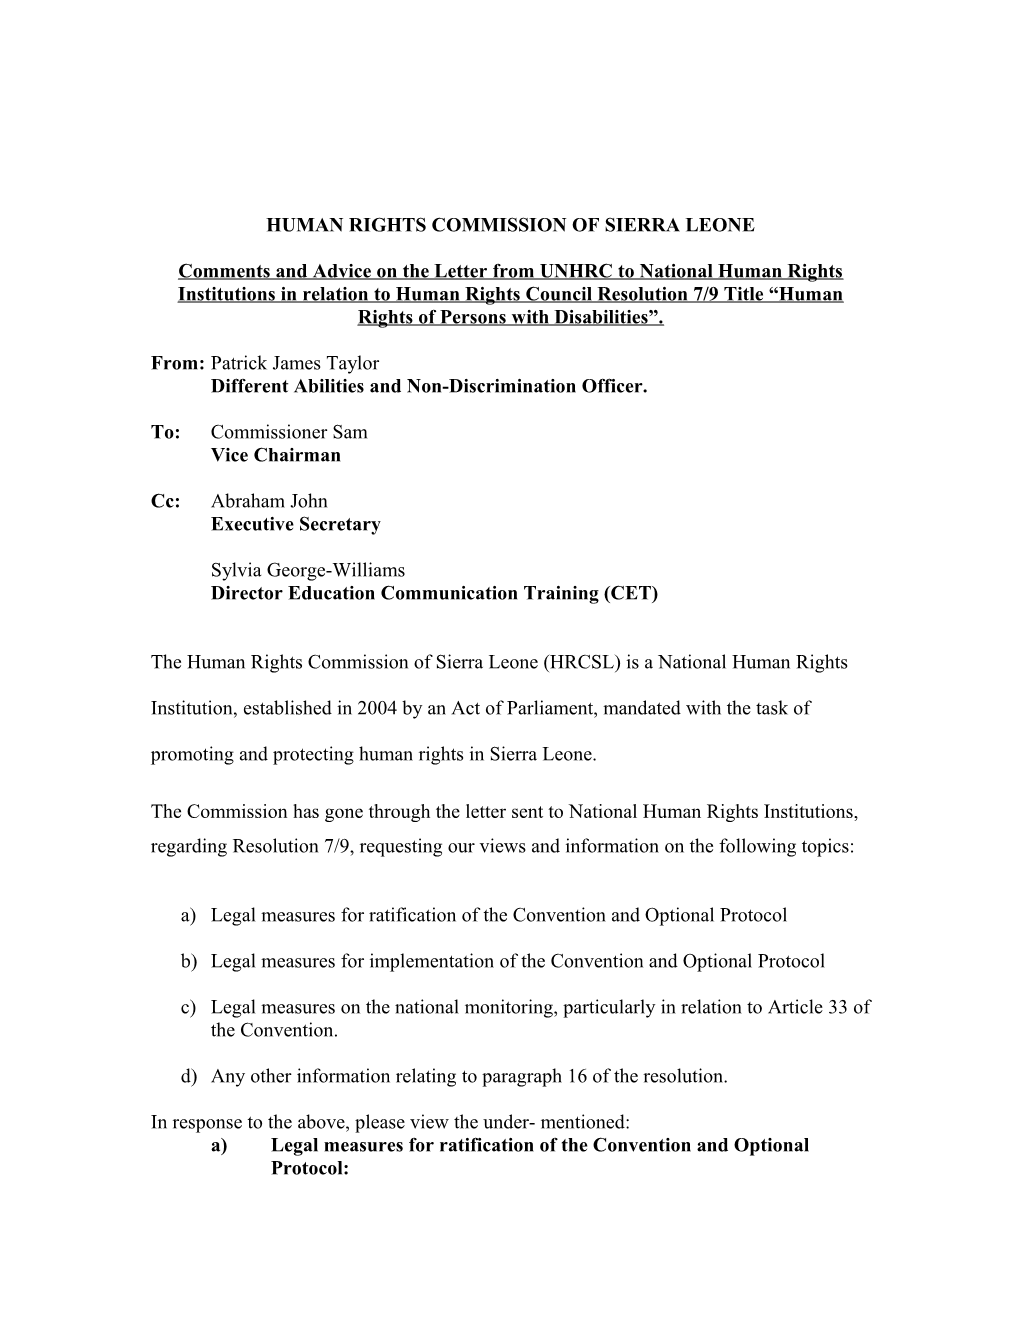 Human Rights Commission of Sierra Leone